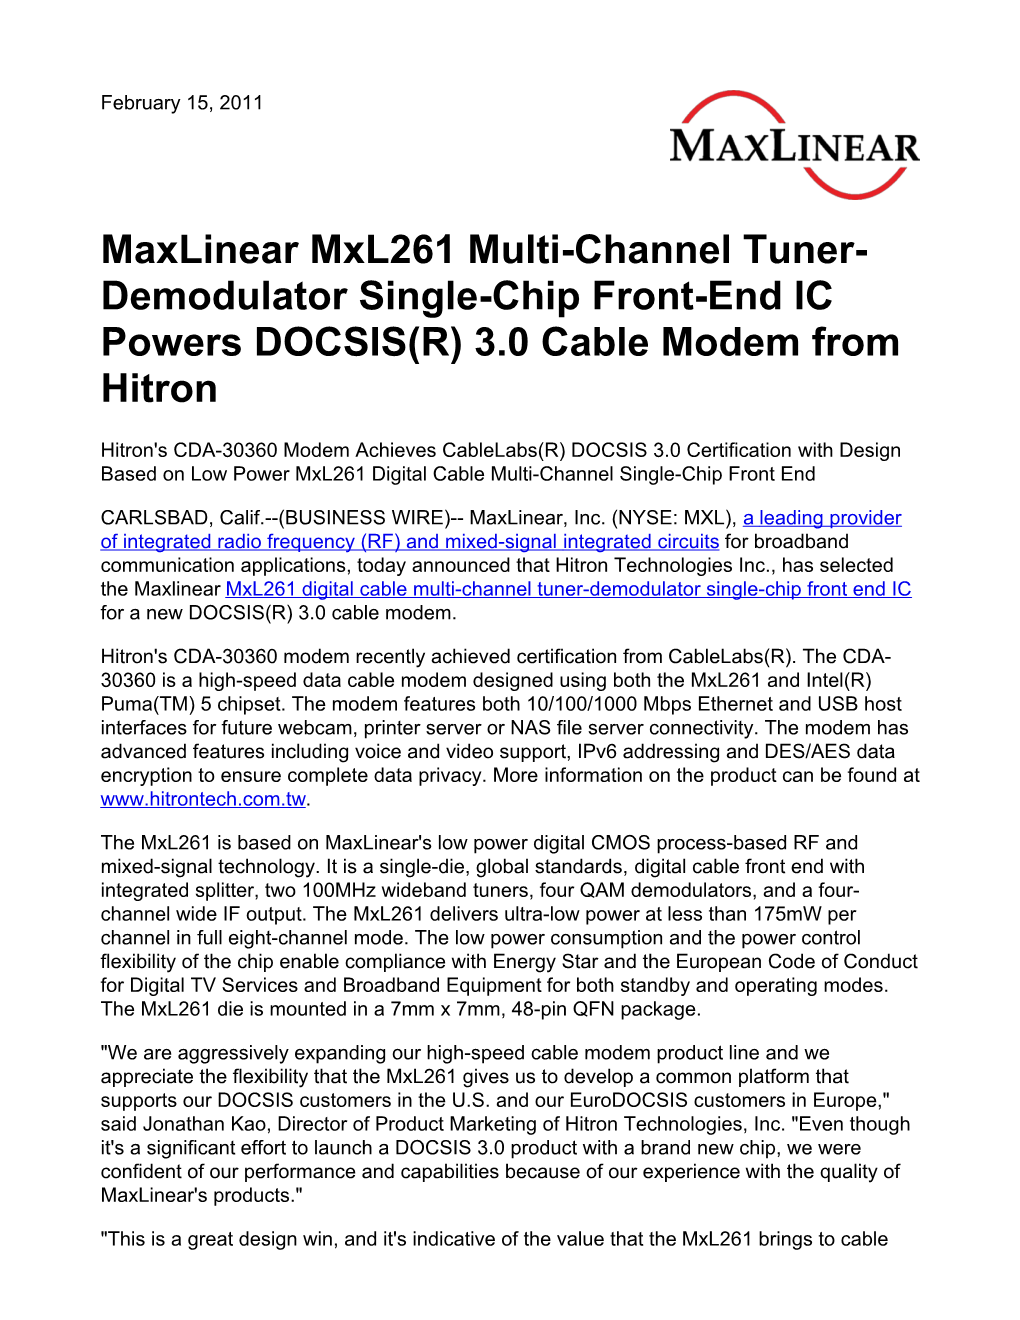 Maxlinear Mxl261 Multi-Channel Tuner- Demodulator Single-Chip Front-End IC Powers DOCSIS(R) 3.0 Cable Modem from Hitron